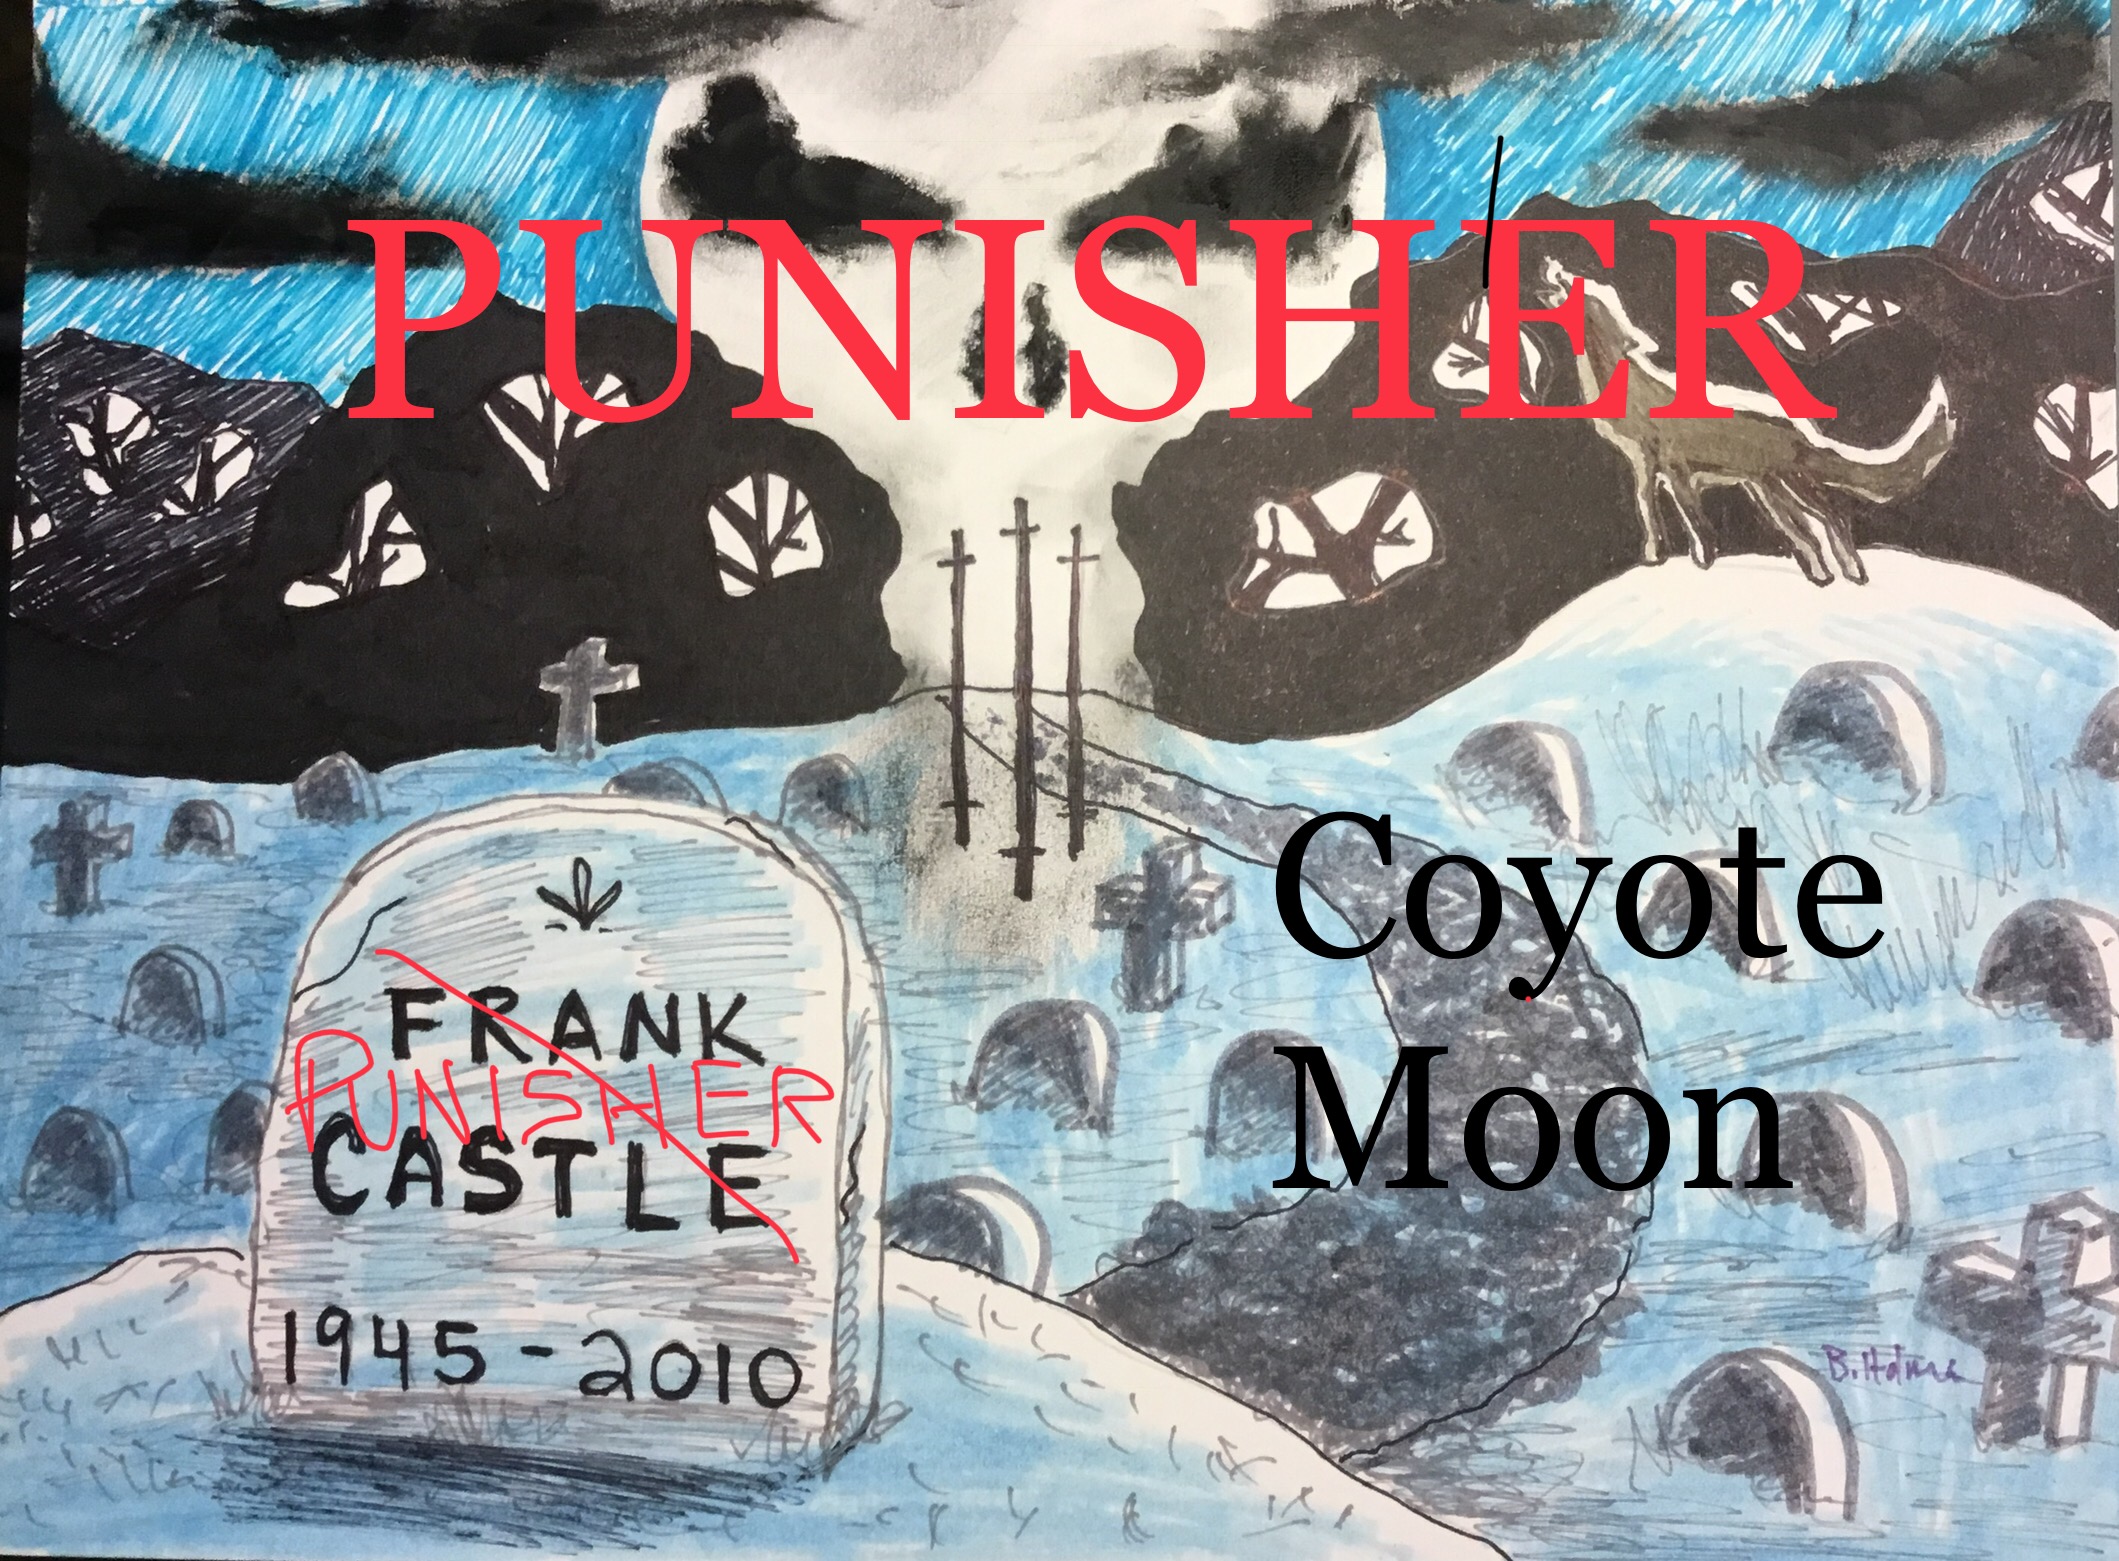 The punisher: coyote moon (fan fiction)